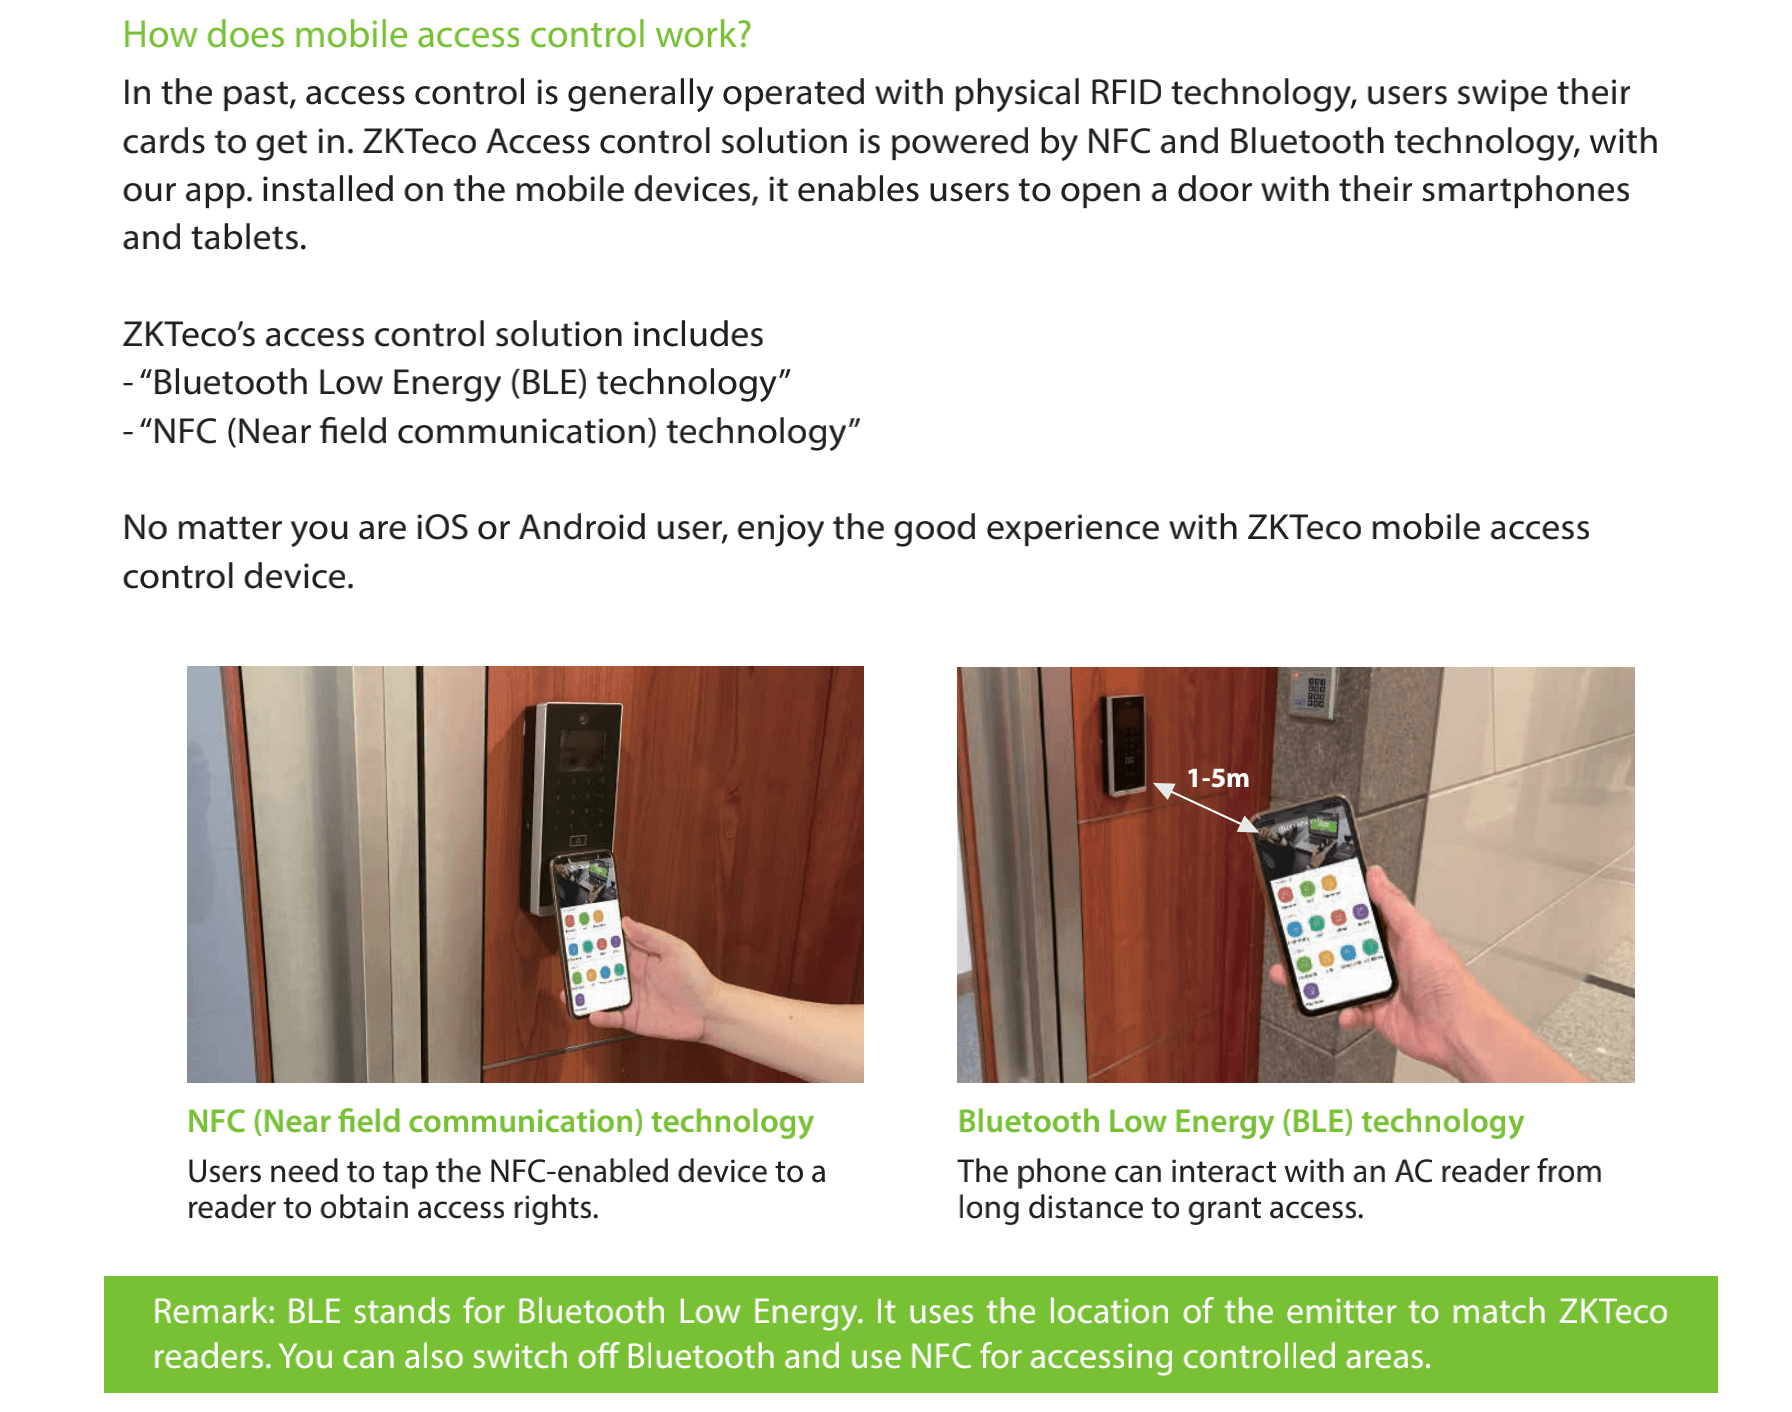 Mobile Access Control Solution